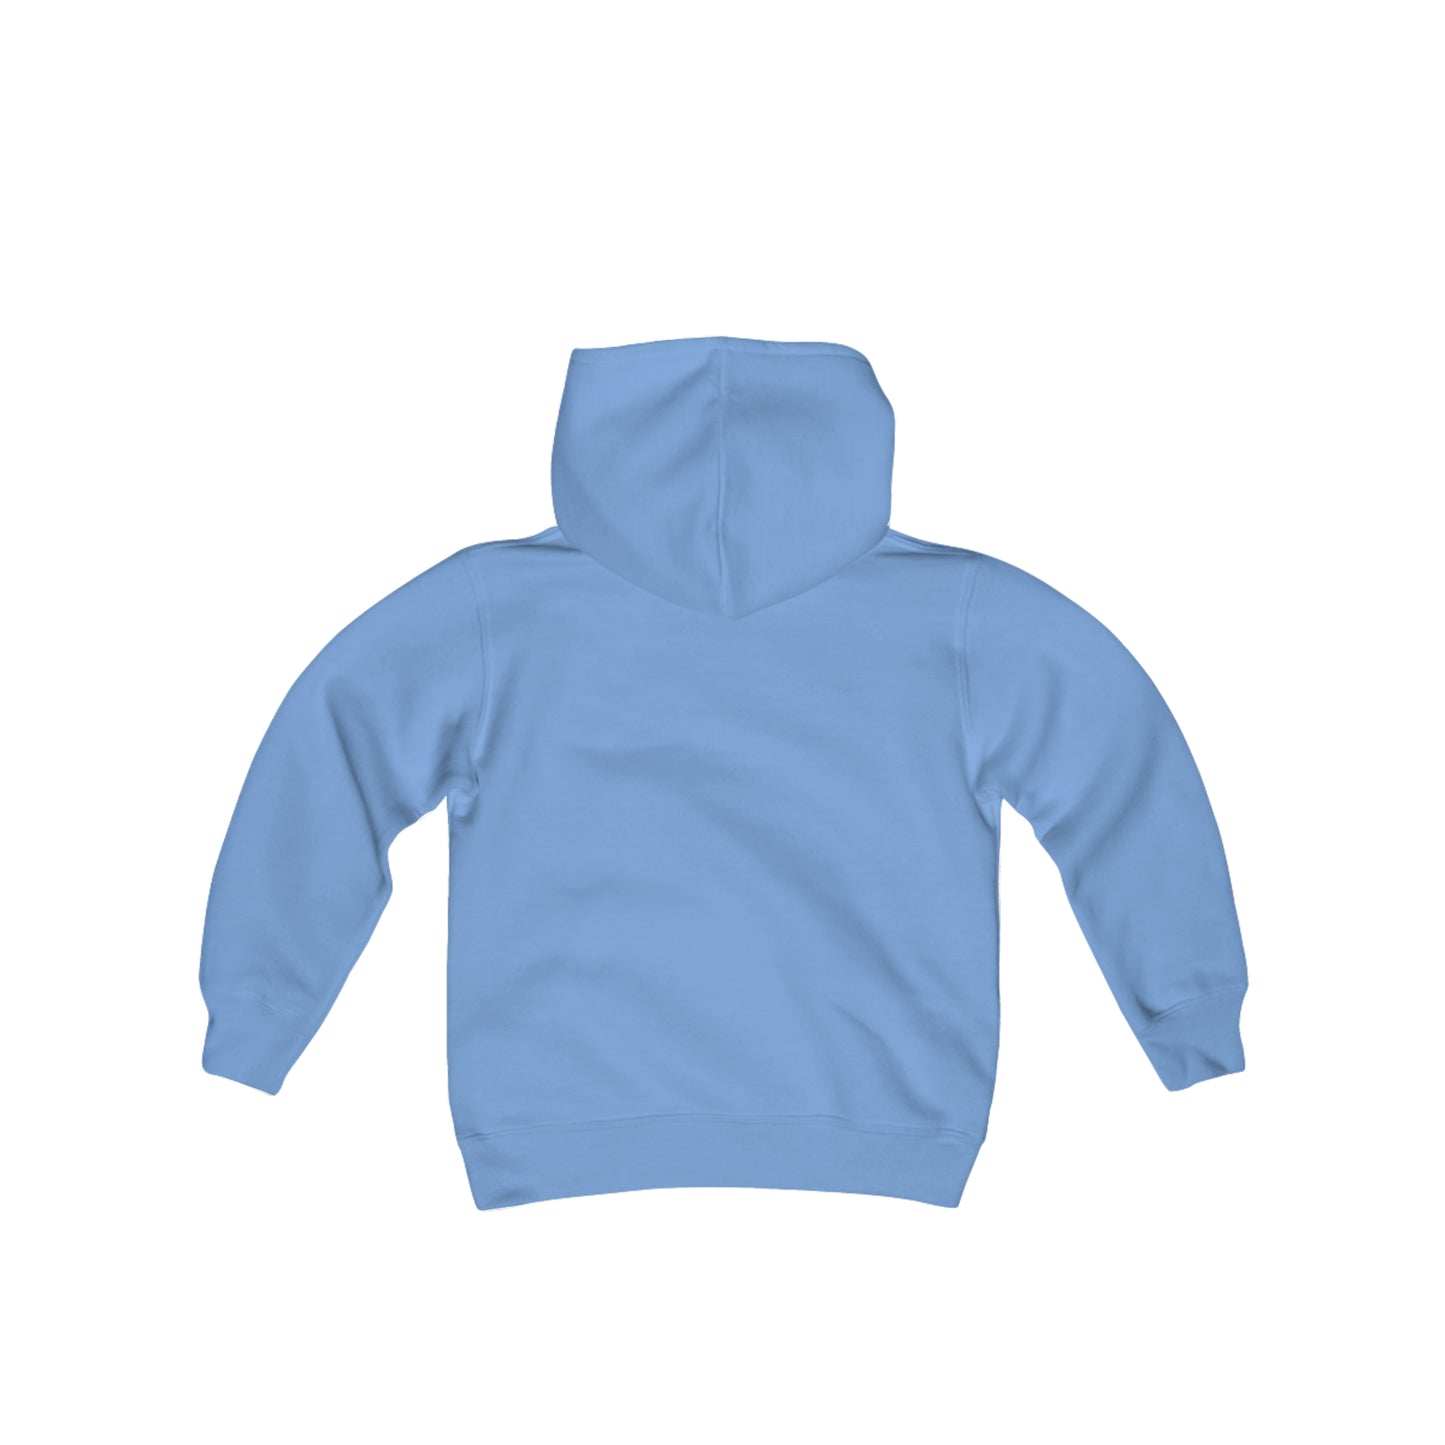 Youth Heavy Blend Hooded Sweatshirt - Dream, Explore, and Achieve